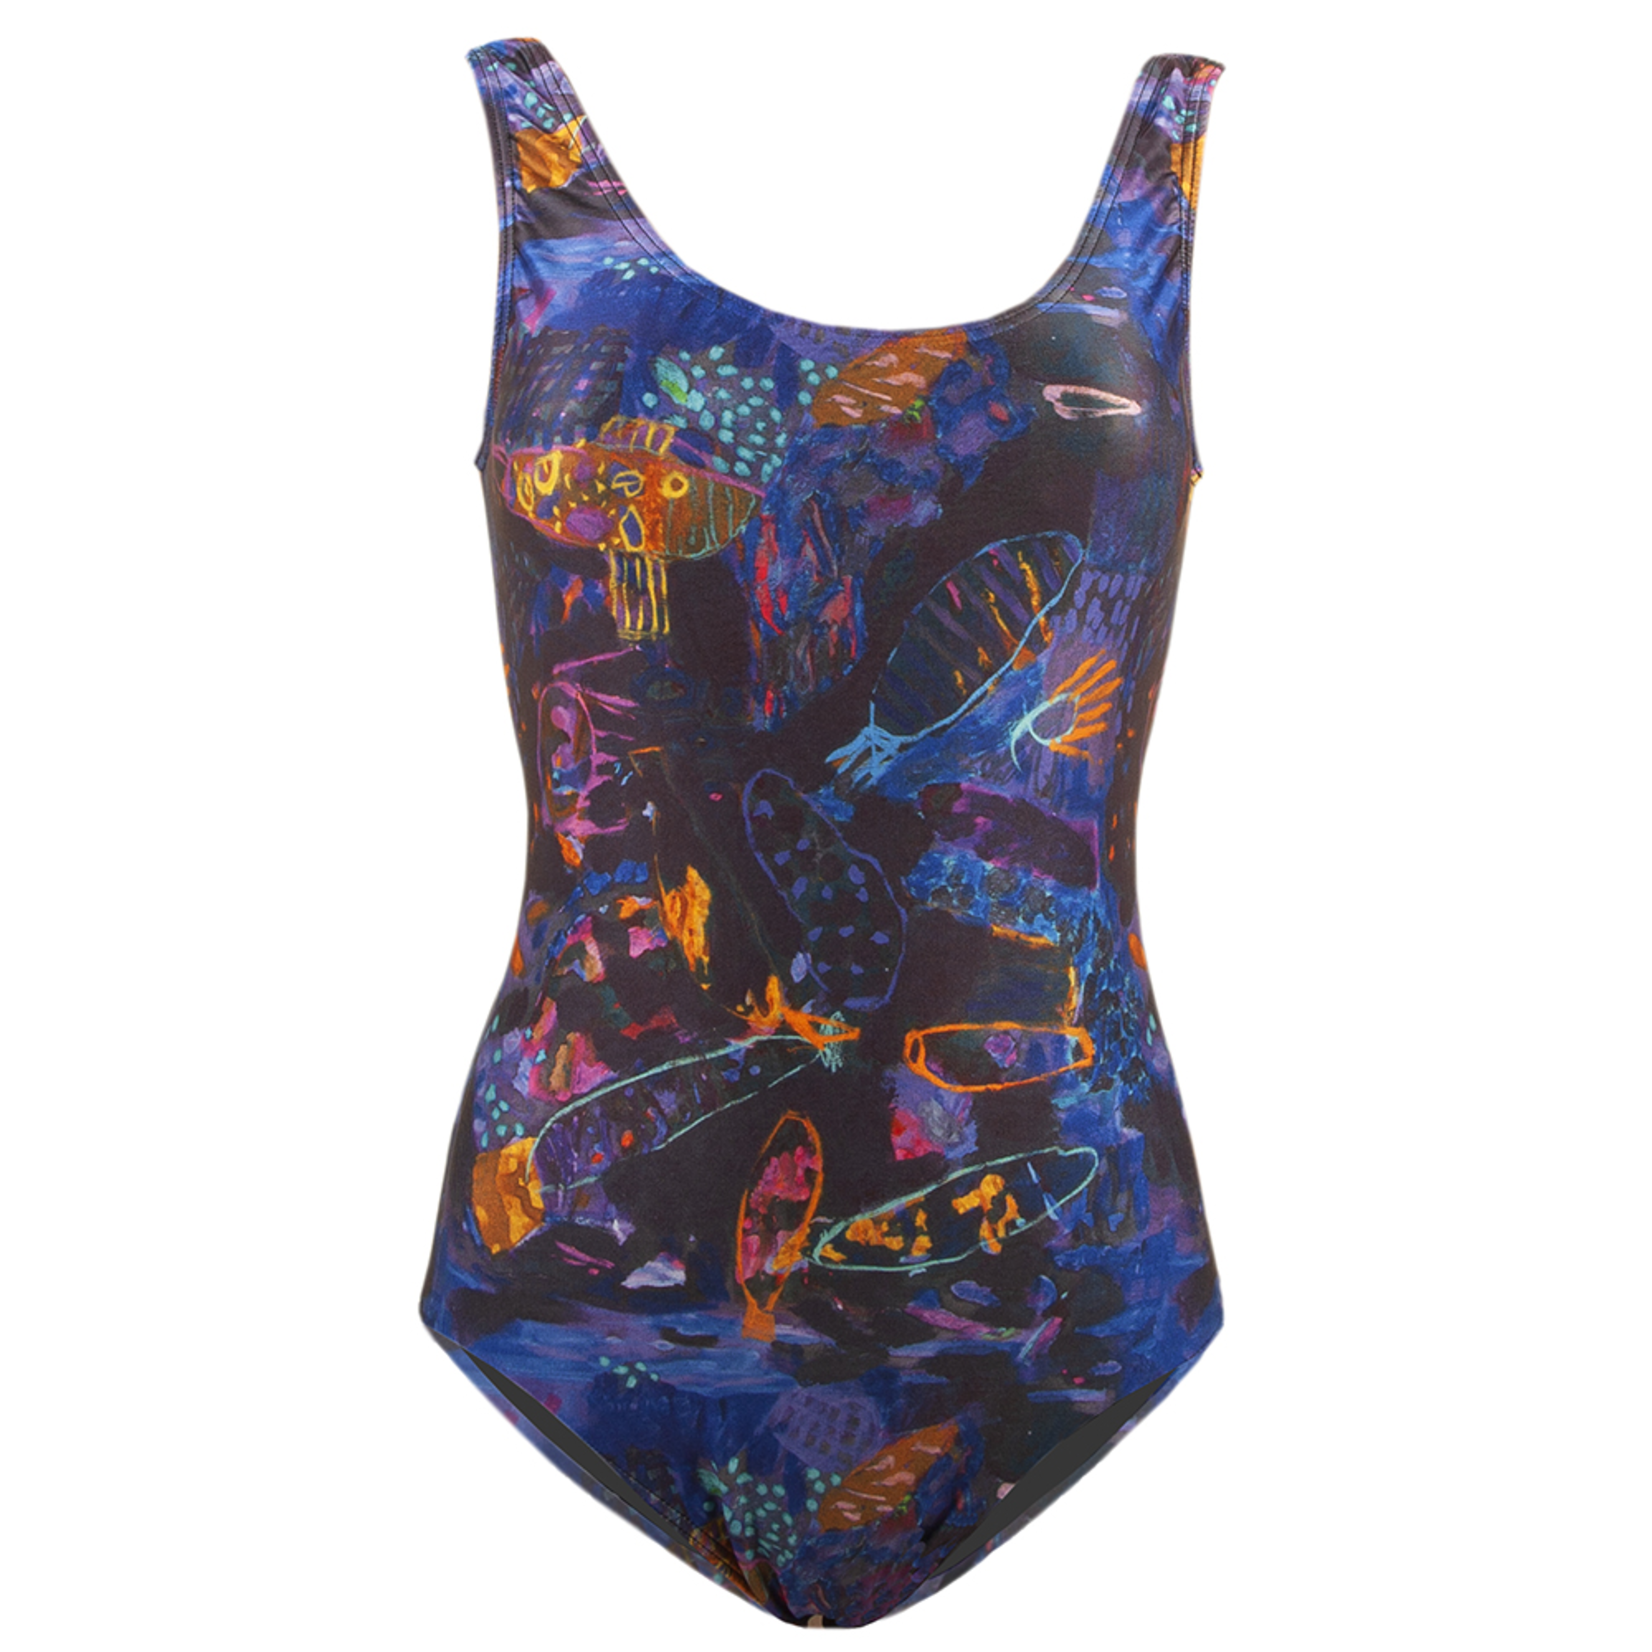 Clothing 'Night opal reef' - One piece Swimsuit